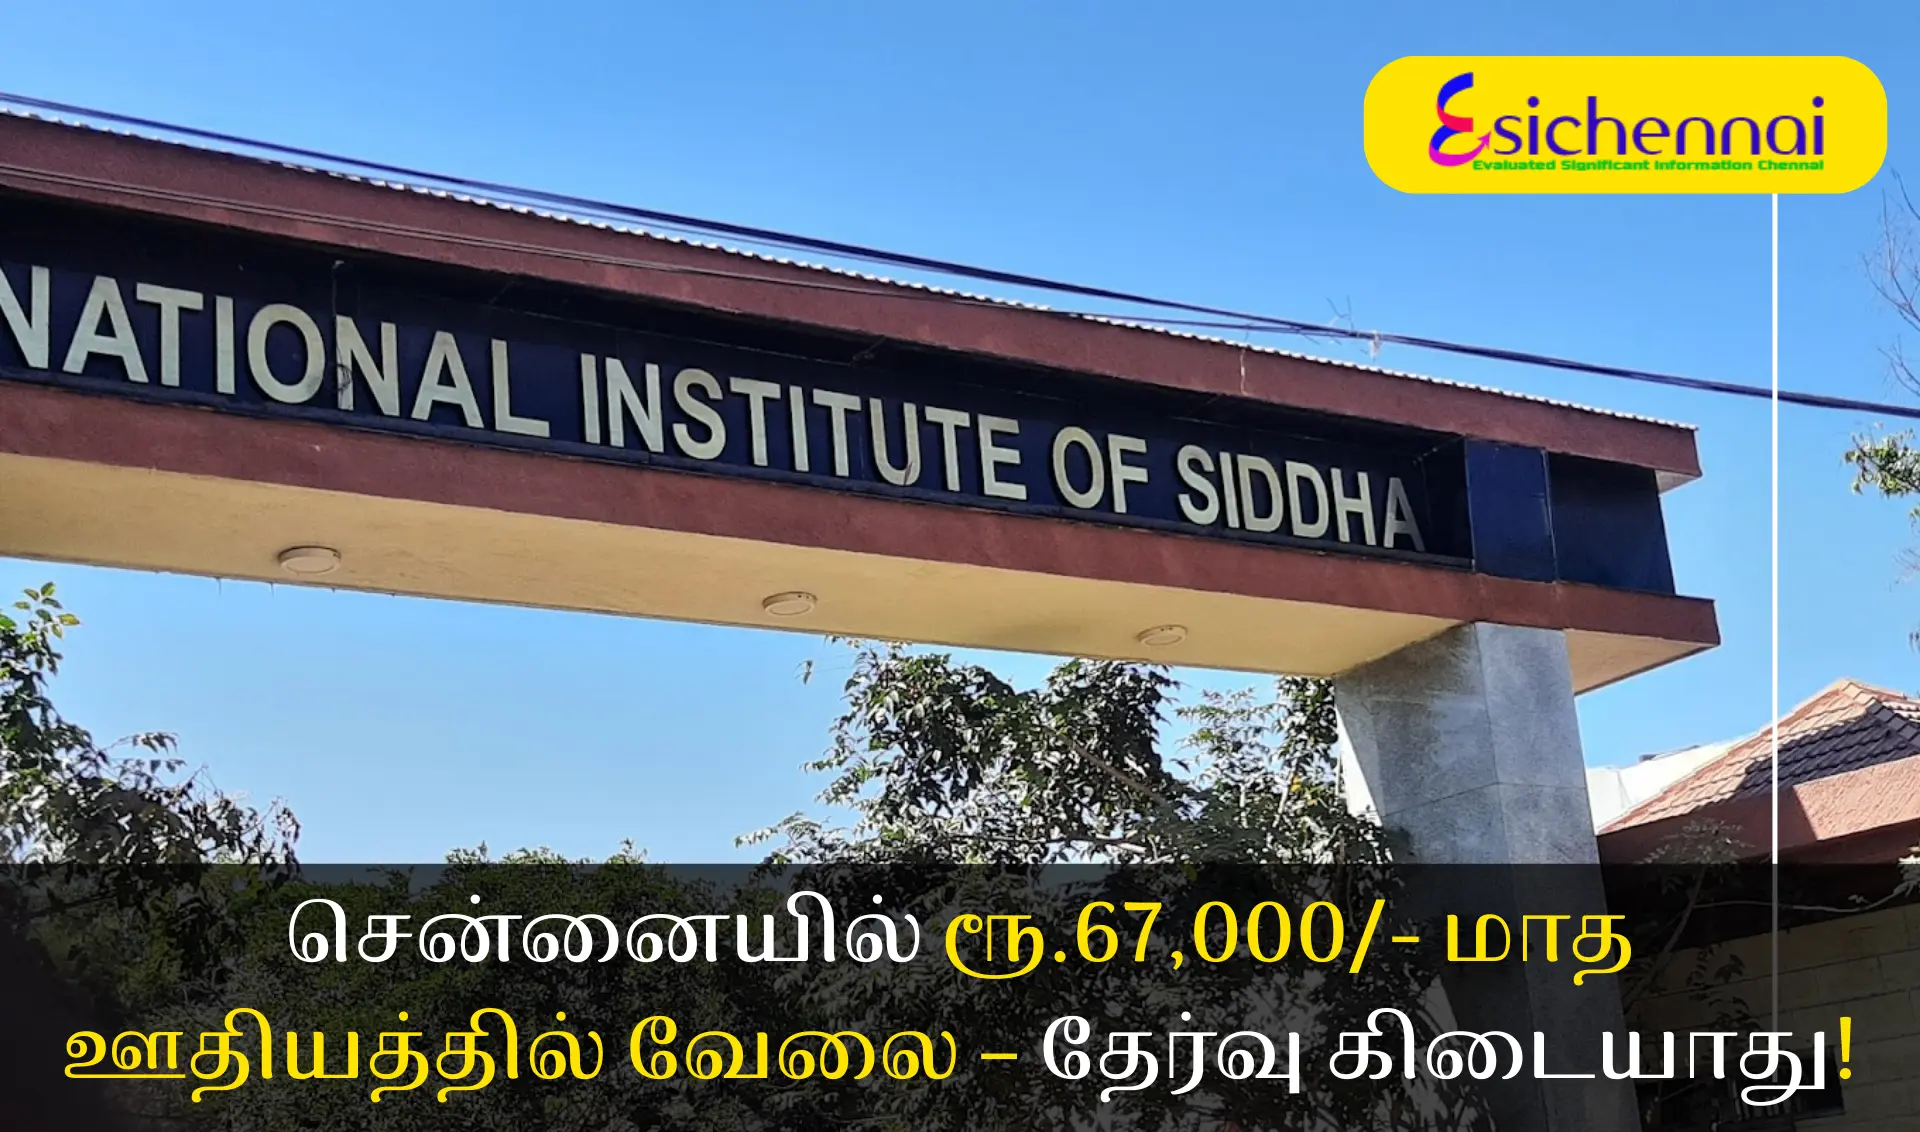 National Institute of Siddha Job Opportunity, No Exam Interested candidates can apply